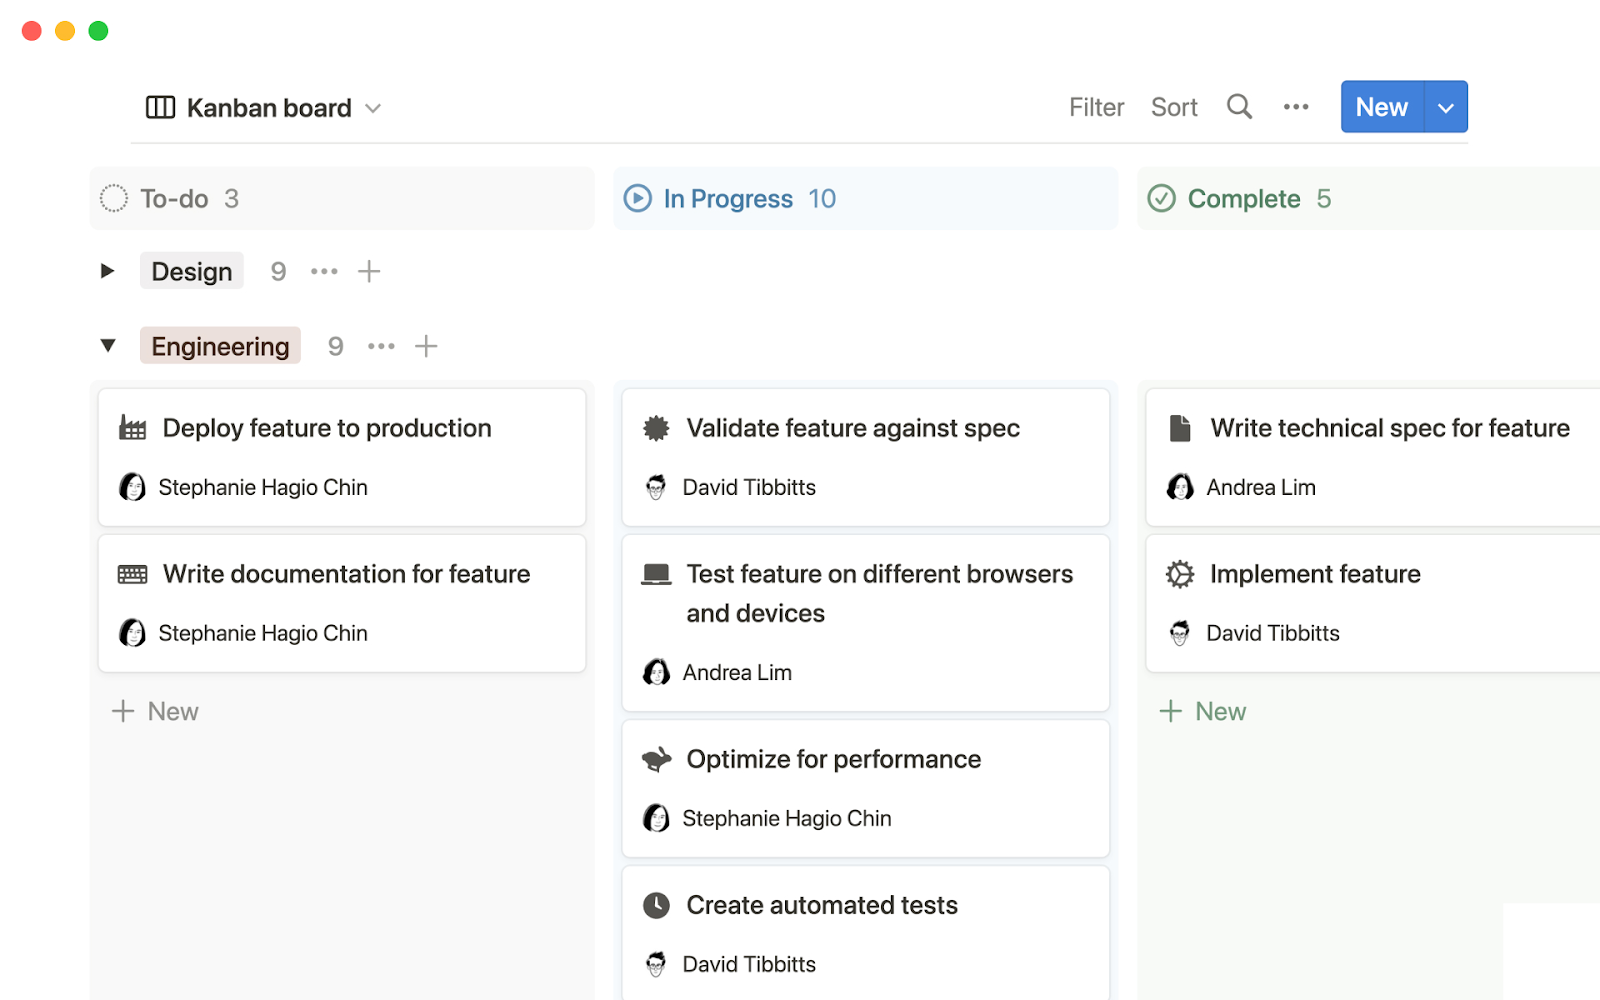 Notion interface showing a Kanban board with "To-do," "In-progress," and "Complete" columns